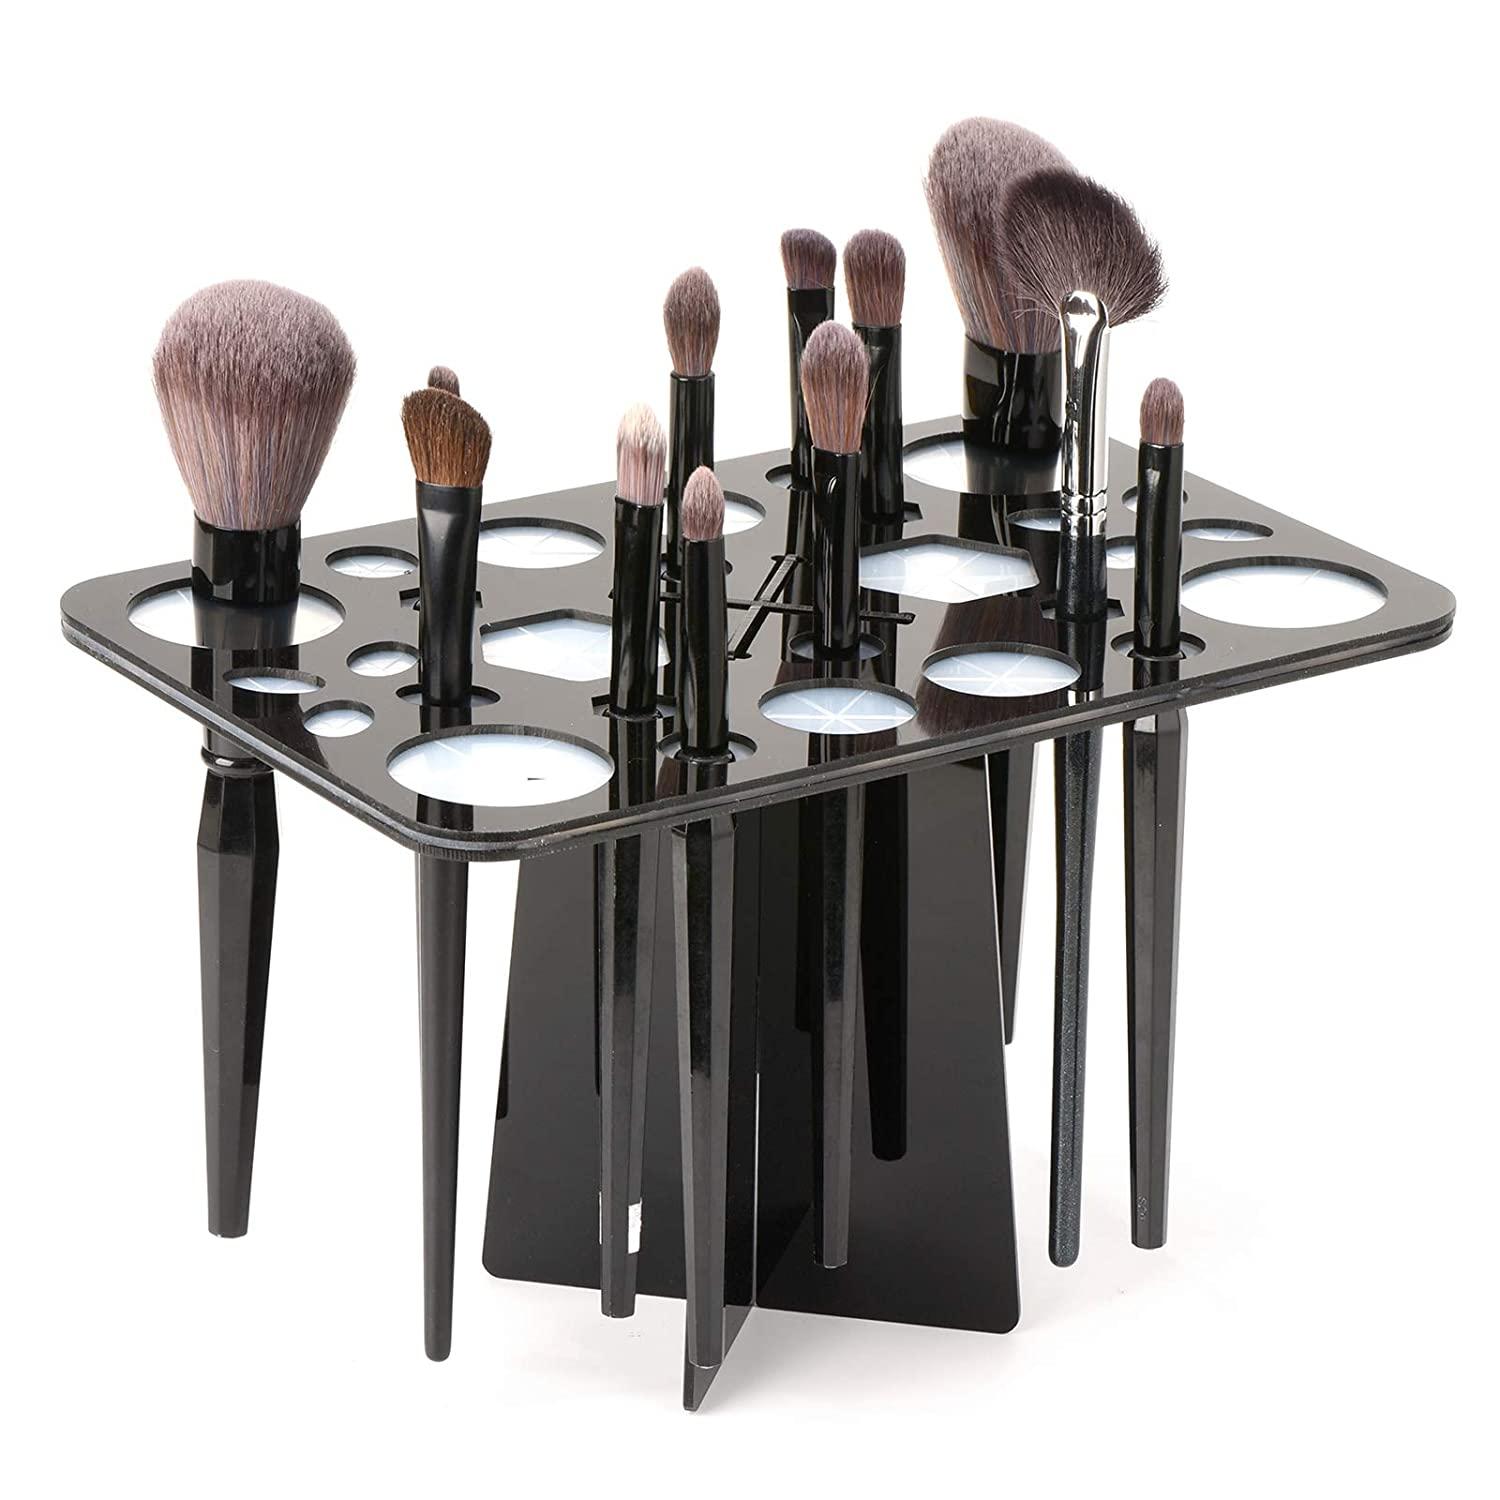 Luckyiren Makeup Brushes Drying Rack, Brushes Dryer, Collapsible 28 Slot Acrylic  Brush Holder Stand Tree Tray Support Display for Makeup Artist Acrylic Nail  Brushes Paintbrushes Makeup Lovers, Black